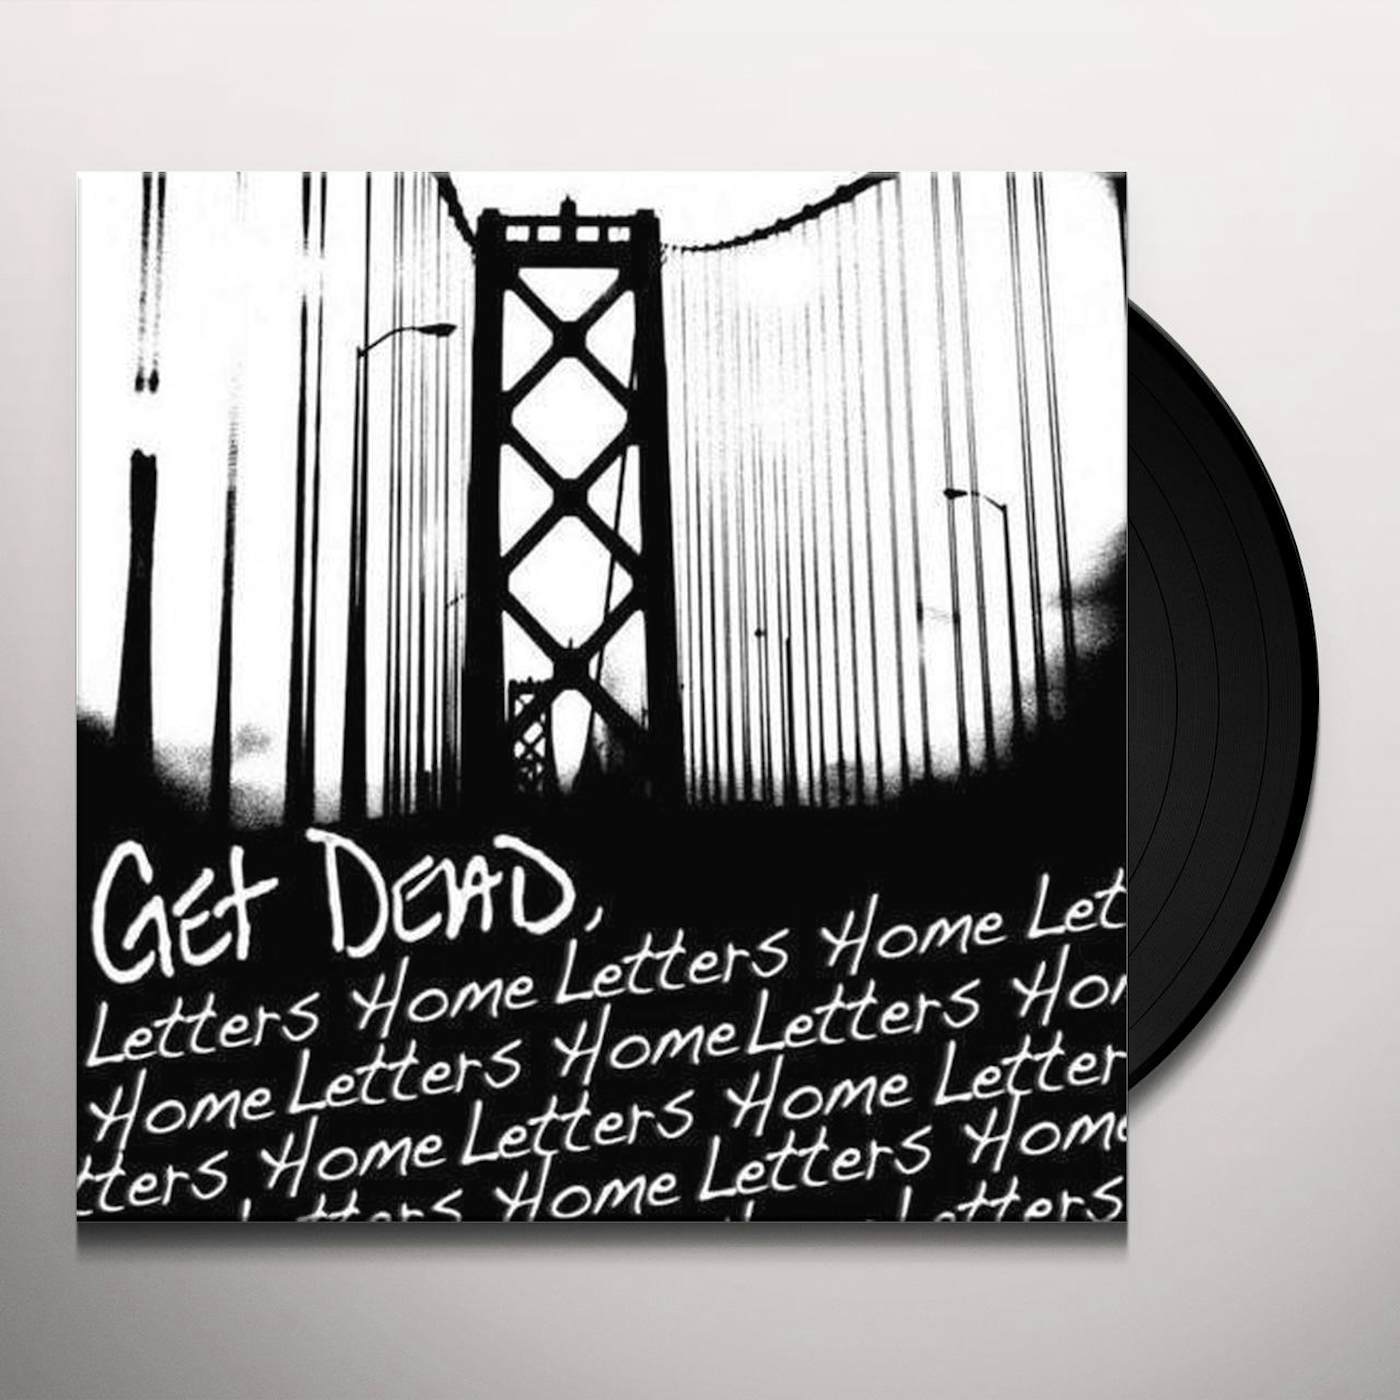 Get Dead Letters Home Vinyl Record